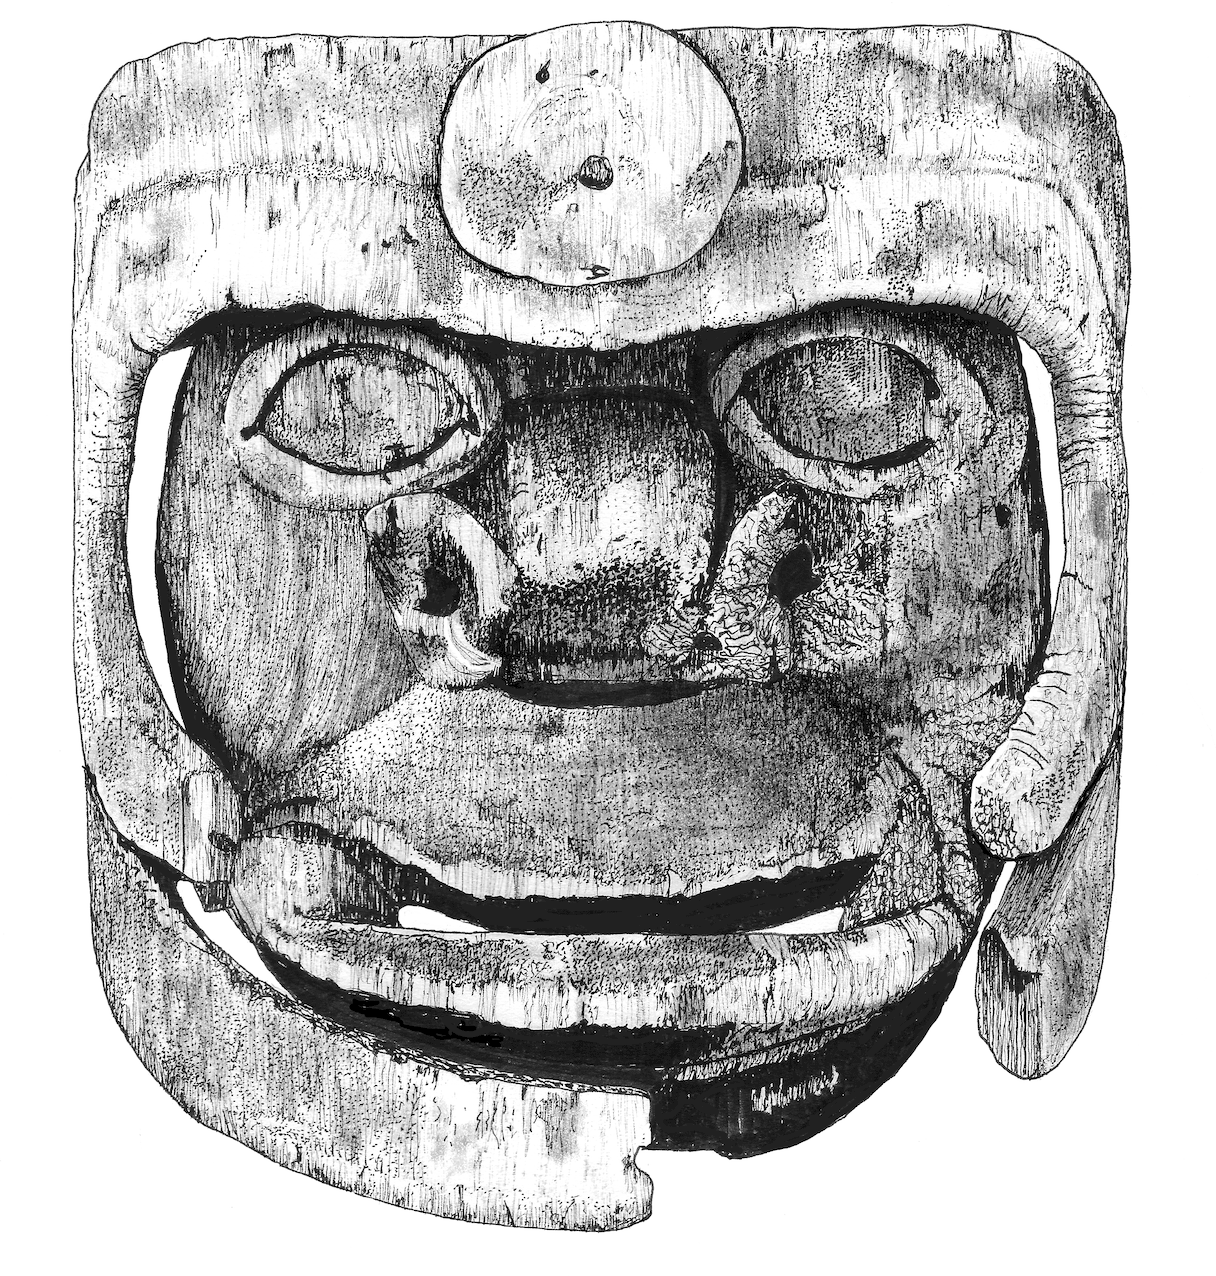 Wooden Aleut masks were formidable and powerful.